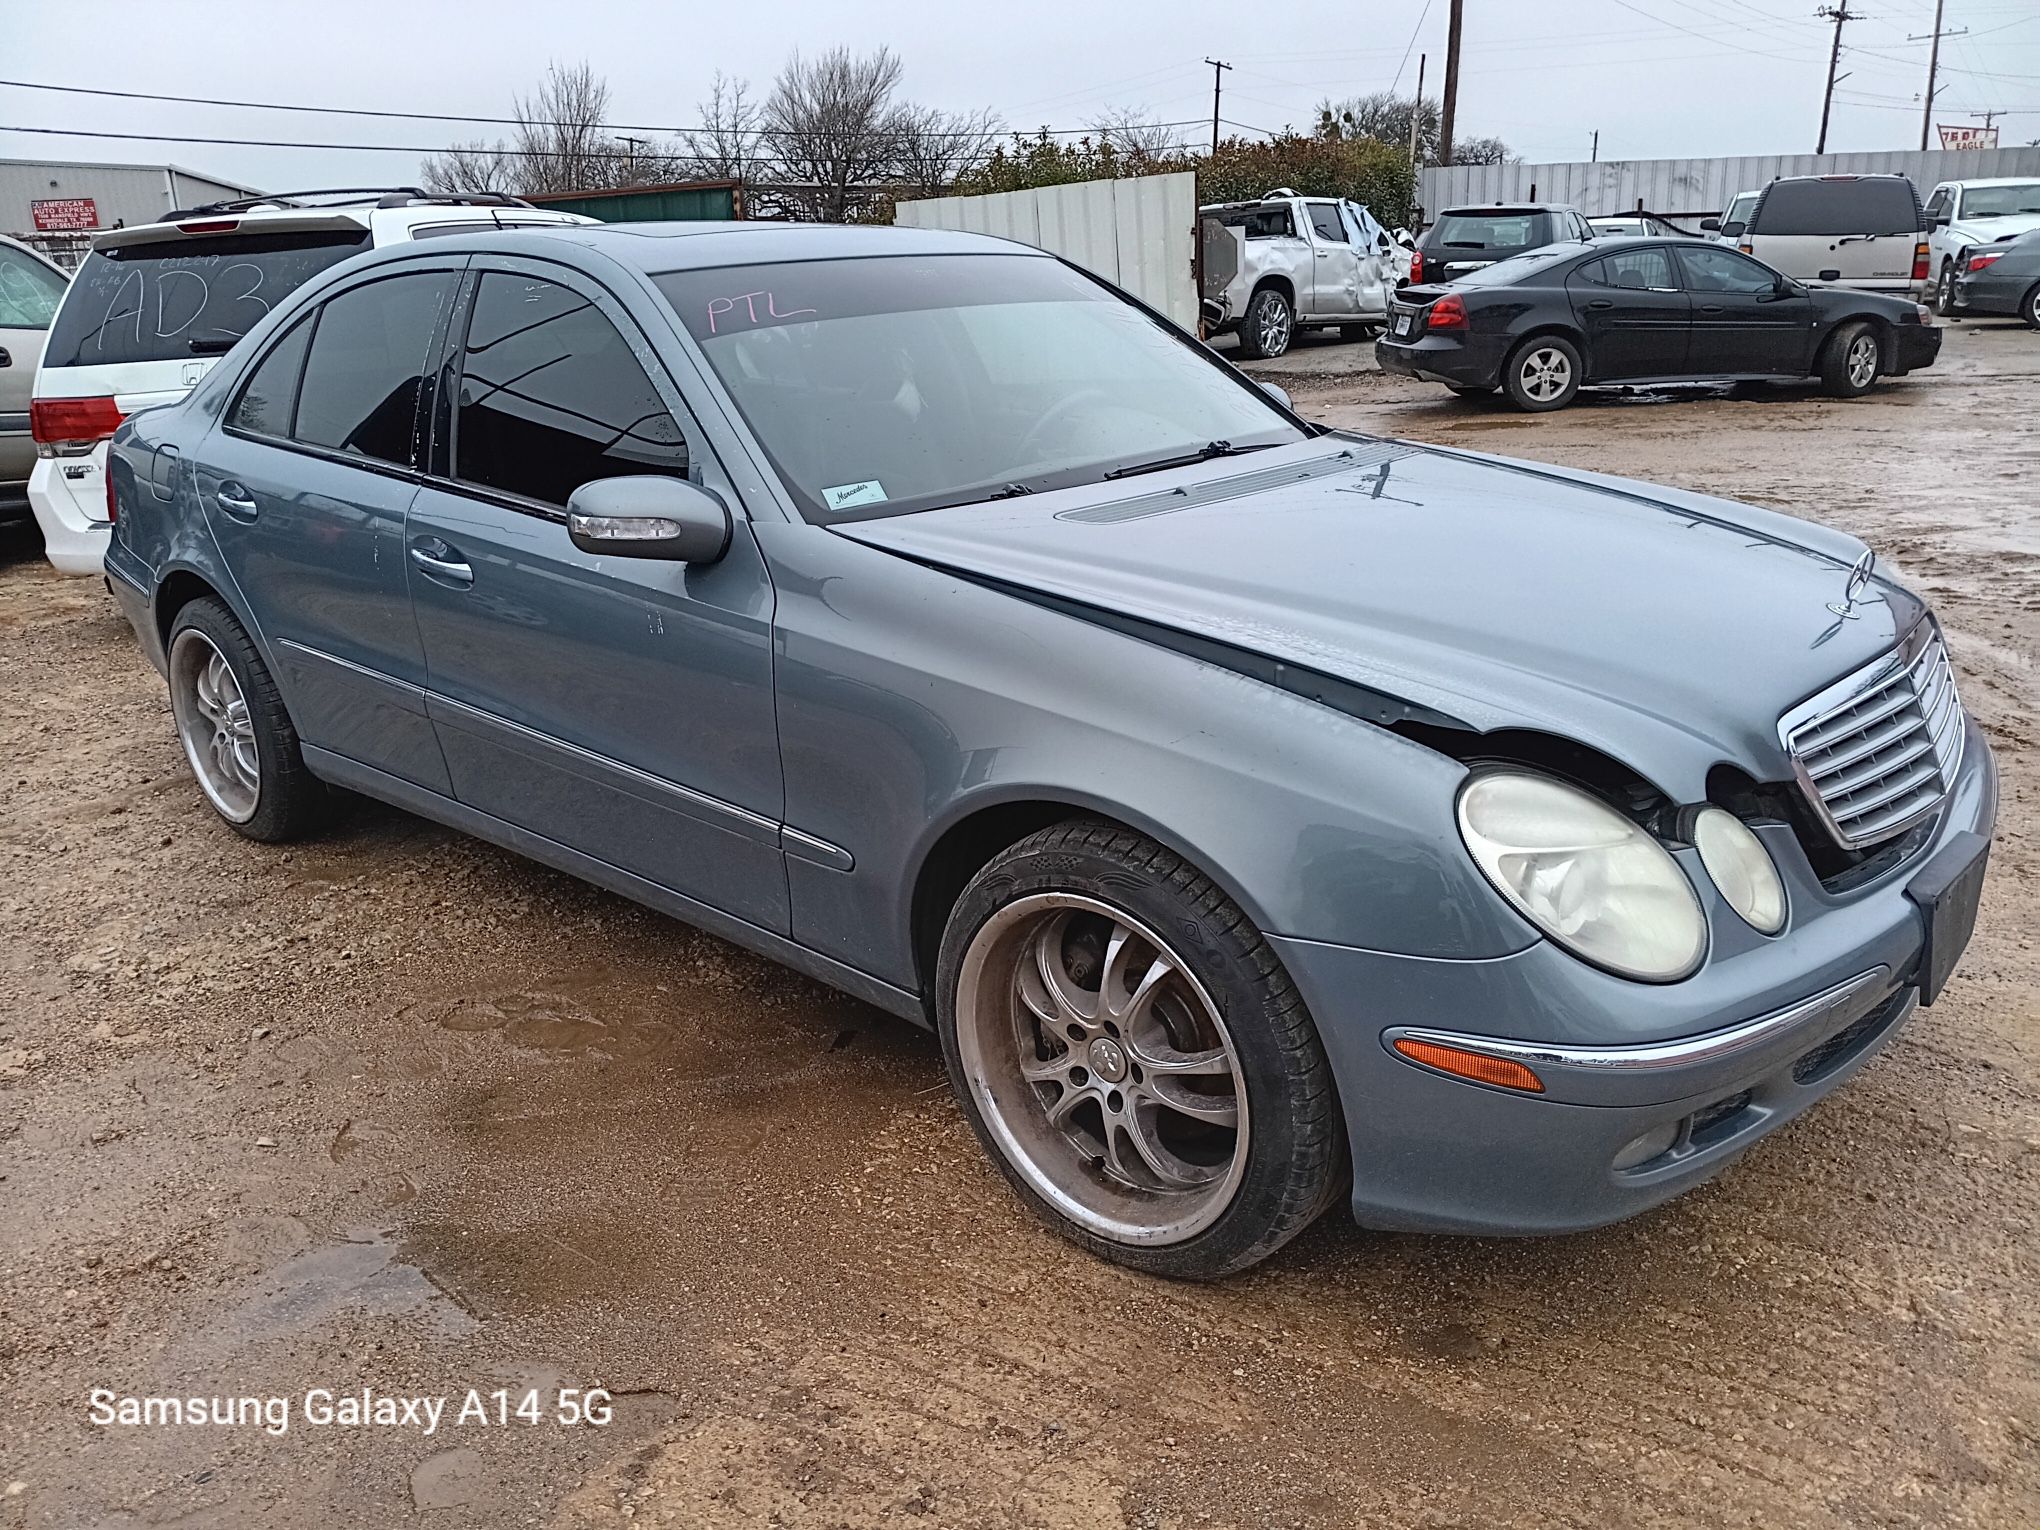 2006 Mercedes E350 - Parts Only #AE5